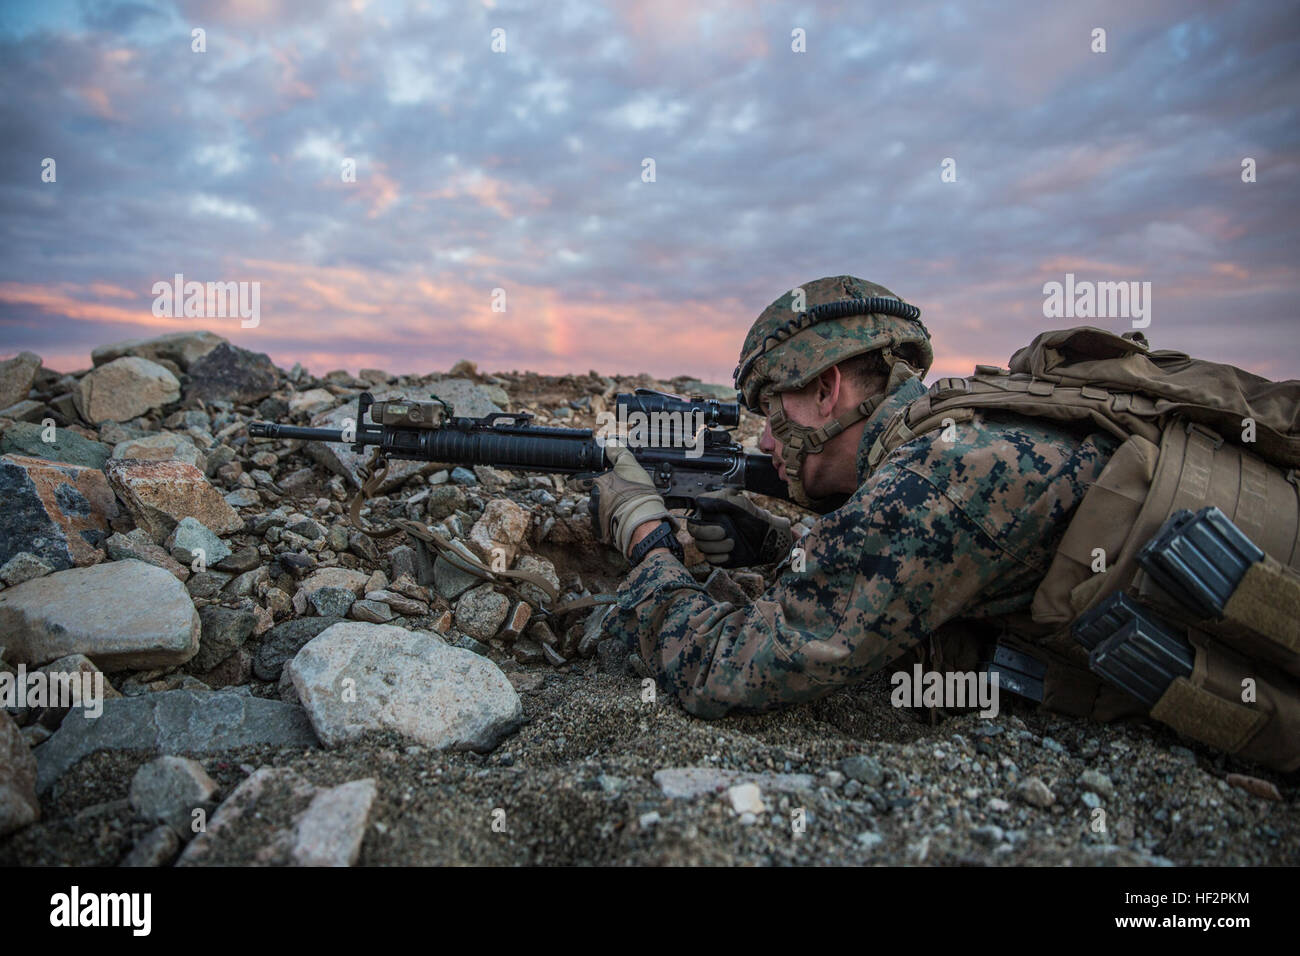 U.S. Marine Lance Cpl. Zachary Thompson aims in on a target during a combined arms exercise aboard Marine Corps Air Ground Combat Center, Twentynine Palms, Calif., Dec. 12, 2014. Thompson is a rifleman with Battalion Landing Team 3rd Battalion, 1st Marine Regiment, 15th Marine Expeditionary Unit.  BLT 3/1 conducted this training concurrent with the 15th MEU’s realistic urban training.  RUT prepares the 15th MEU’s Marines for their upcoming deployment, enhancing their combat skills in environments similar to those they may find in future missions. (U.S. Marine Corps Photo by Sgt. Emmanuel Ramos Stock Photo